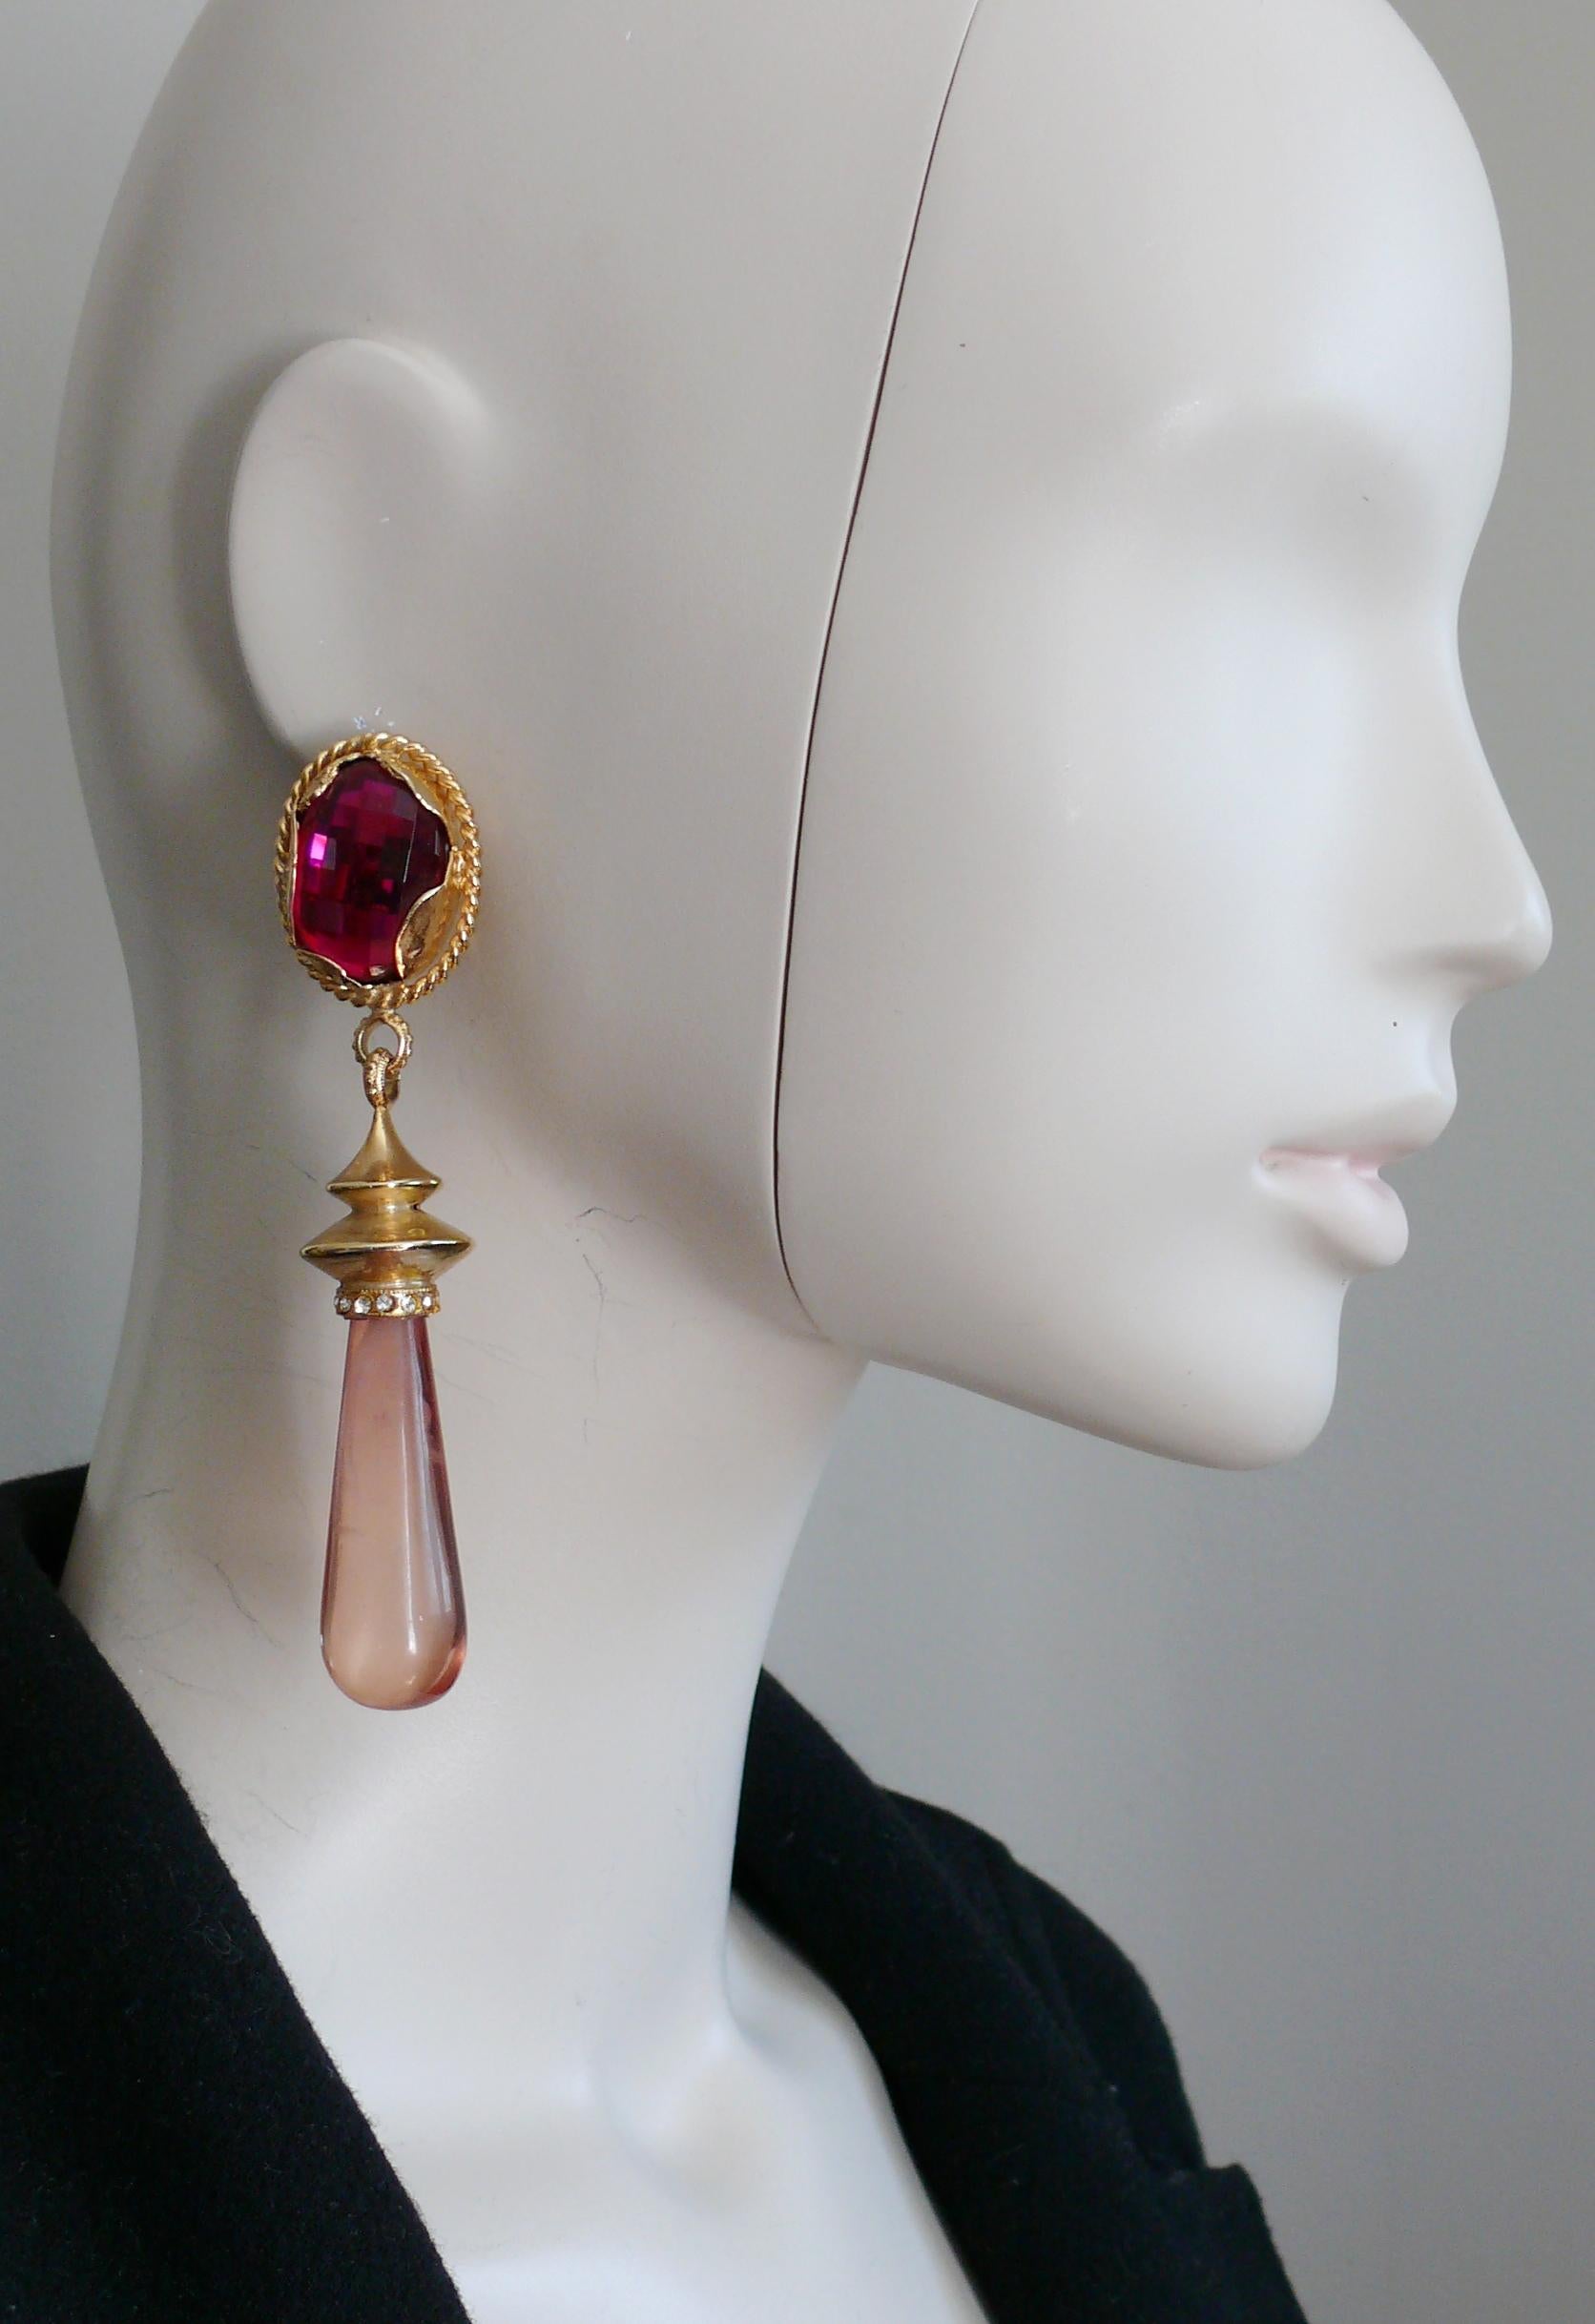 GIANFRANCEO FERRE vintage gold toned dangling earrings (clip-on) embellished with a faceted fuschia resin cabochon, a massive marbled pink resin drop and clear crystals.

Embossed FERRE Made in Italy.

Indicative measurements : height approx. 10.5